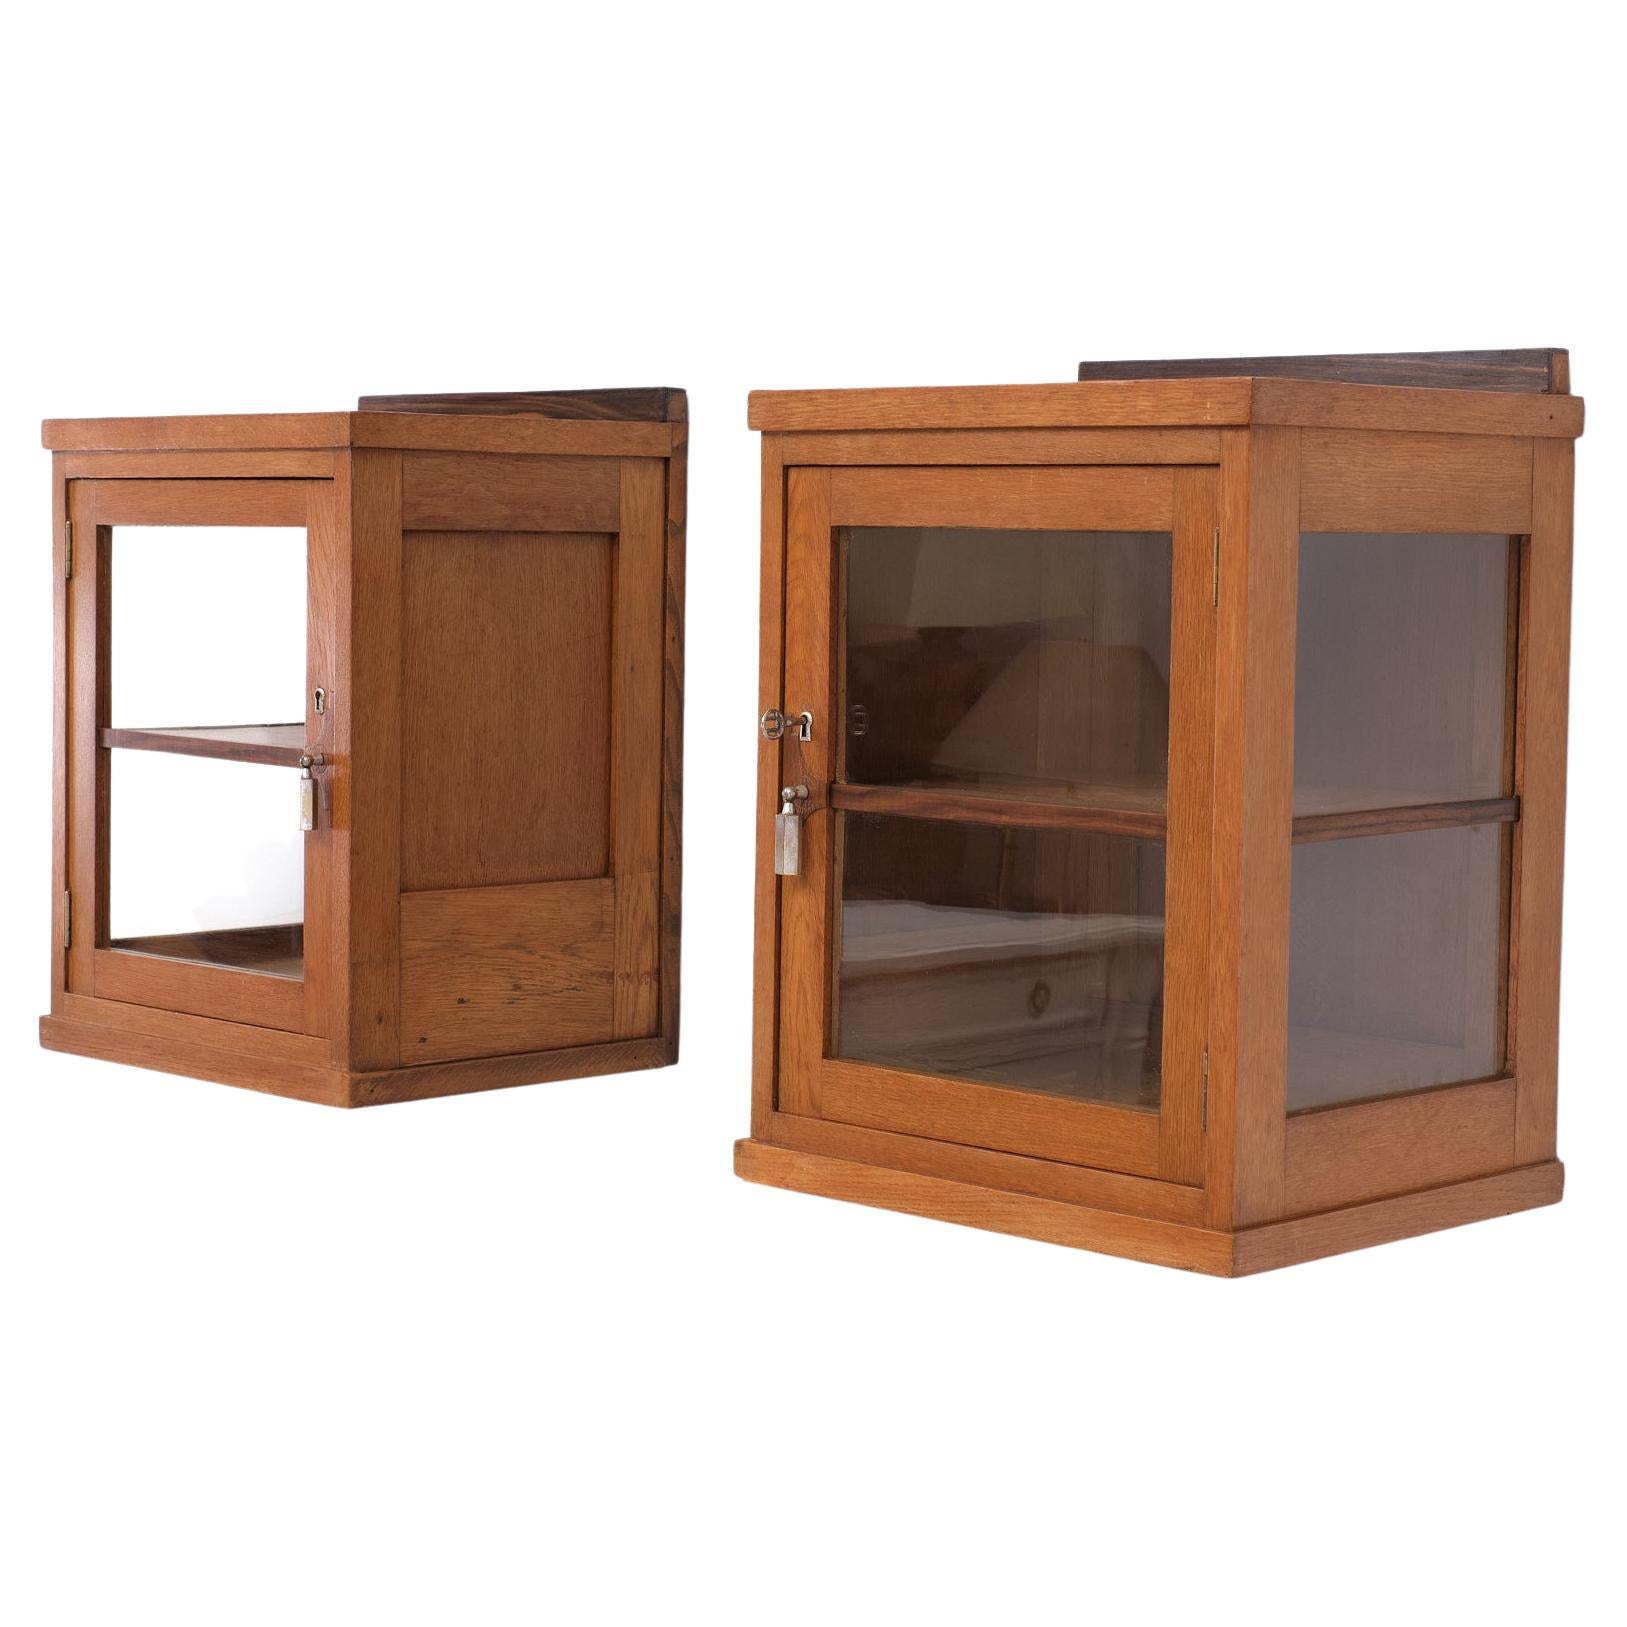 Two very nice Oak Wood hanging Cabinets .
Art deco, 1930s. One shelve each and one key . Nickel handles . Good condition . 
Please don't hesitate to reach out for alternative shipping quote